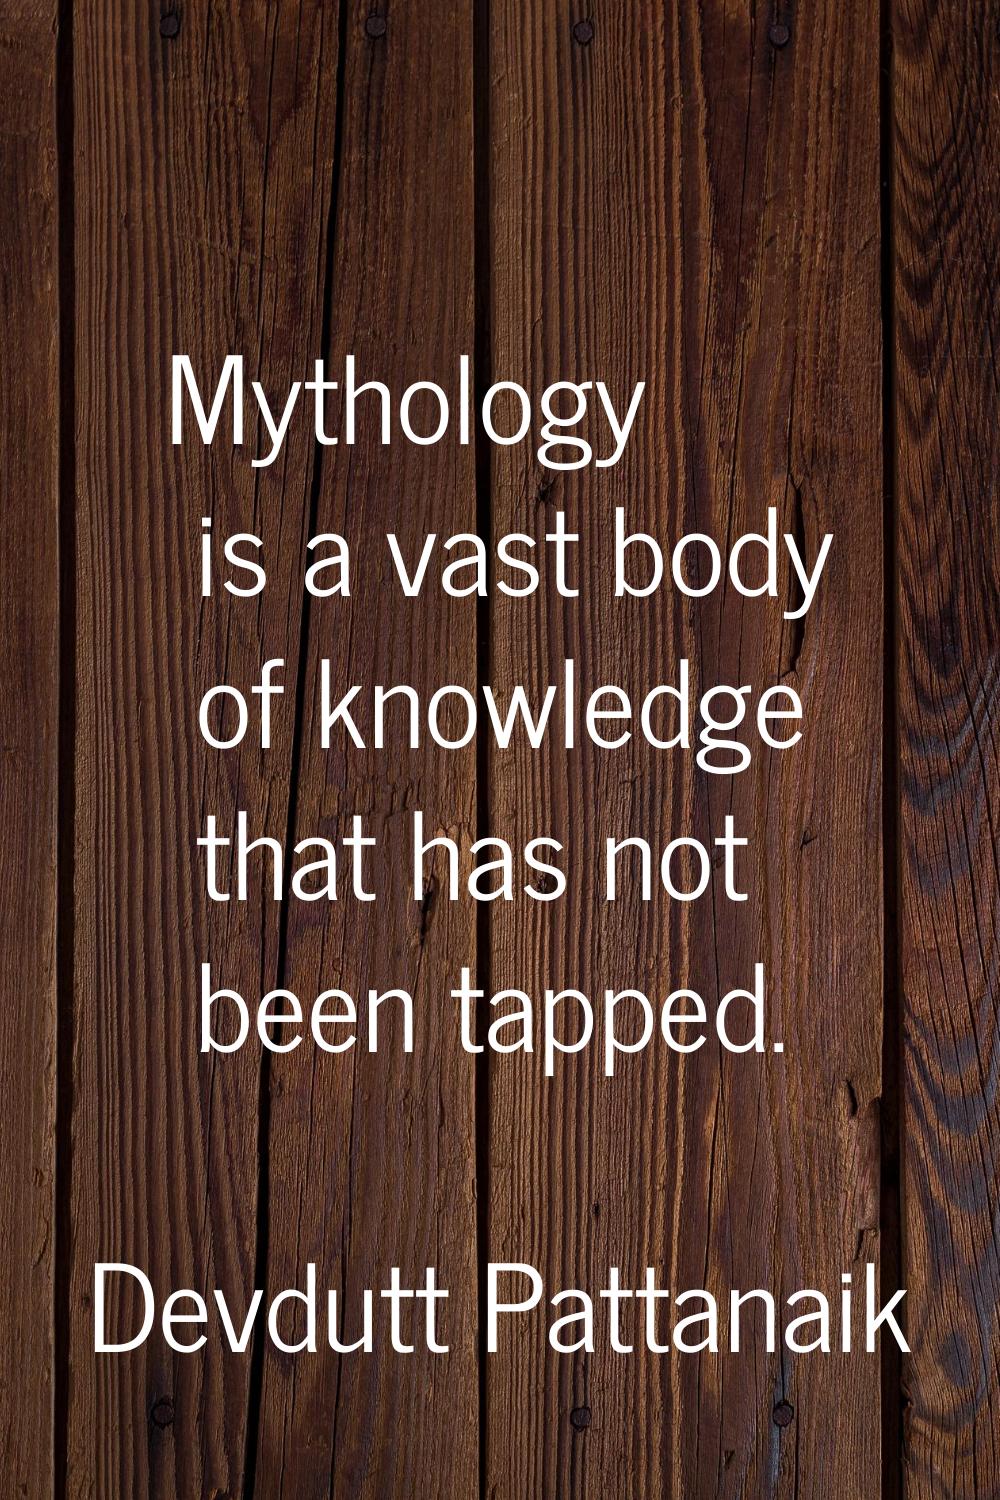 Mythology is a vast body of knowledge that has not been tapped.